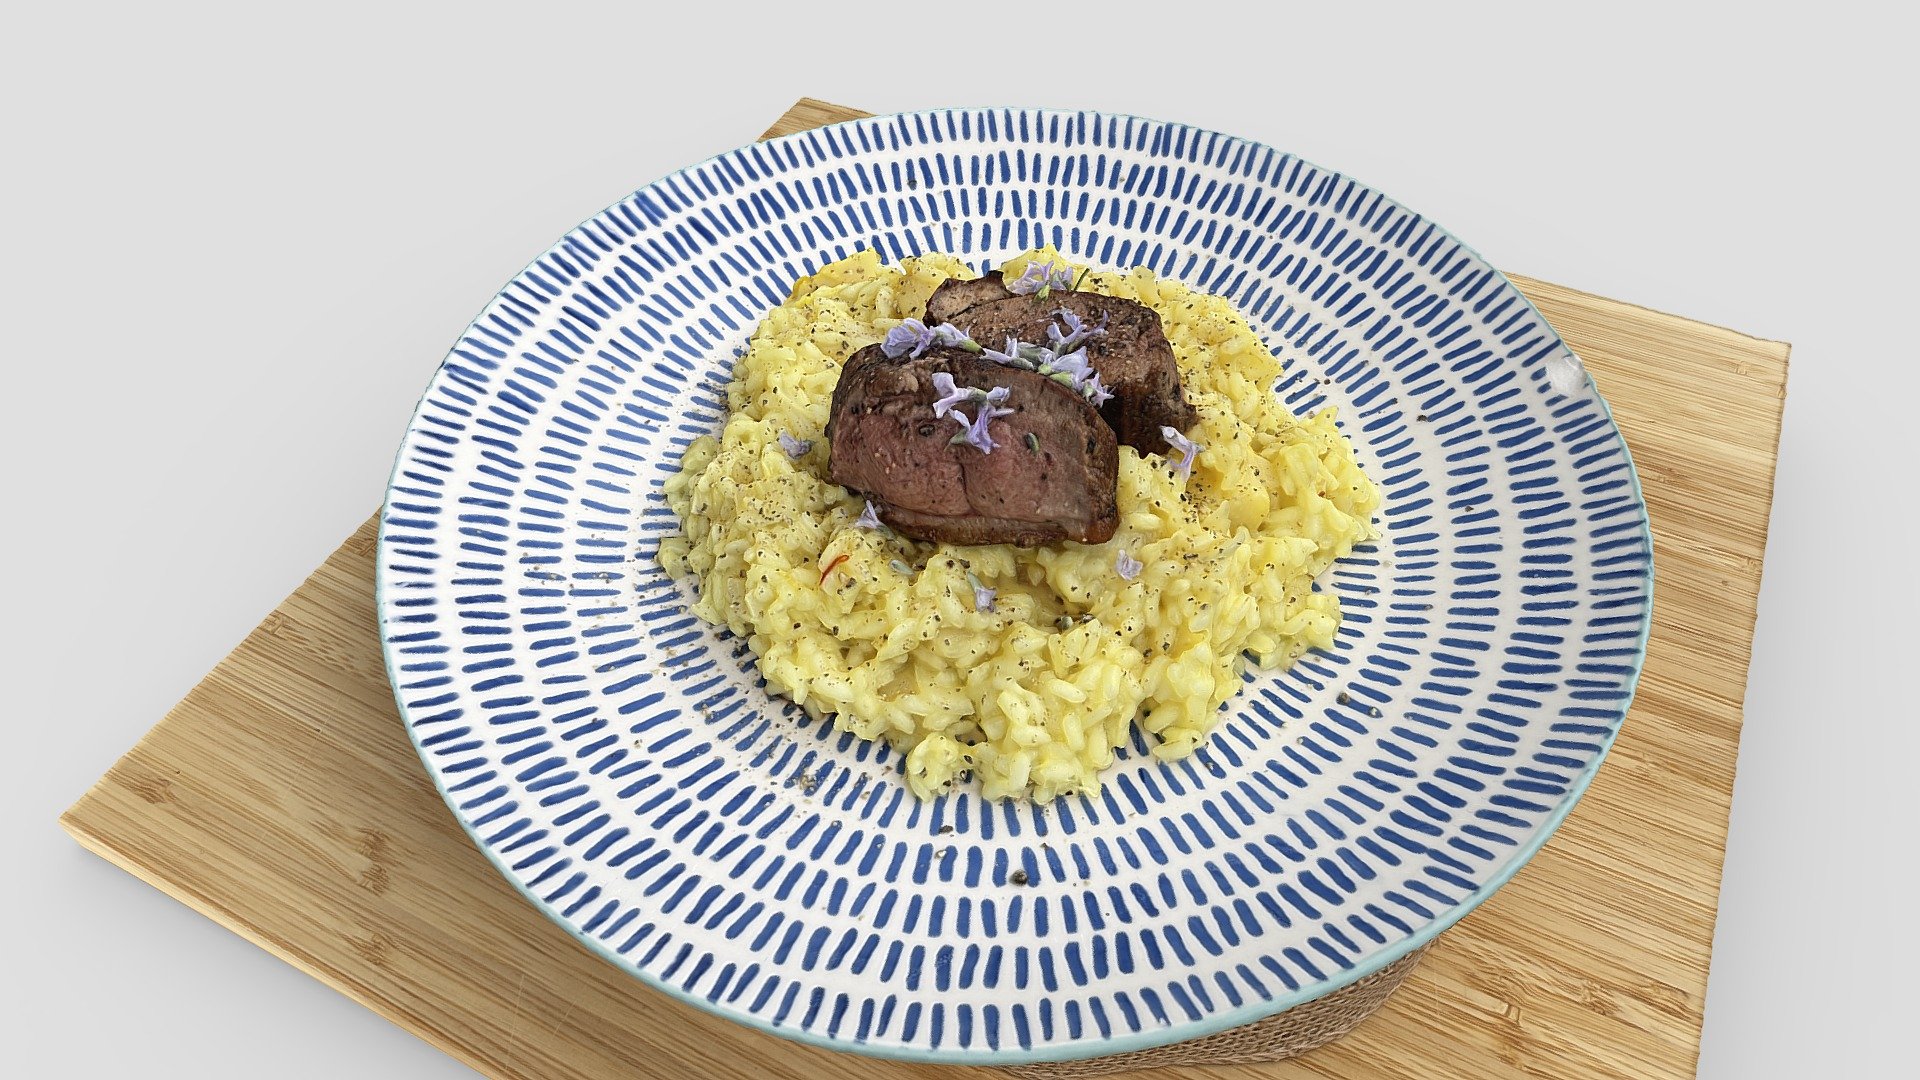 This is a very simple recipe, although it is difficult to make an authentic risotto. Such plates are ideal for scanning because of the many features.

Check my AR/VR recipes and support me on Patreon - Saffron Risotto With Duck Breast - 3D model by Zoltanfood 3d model